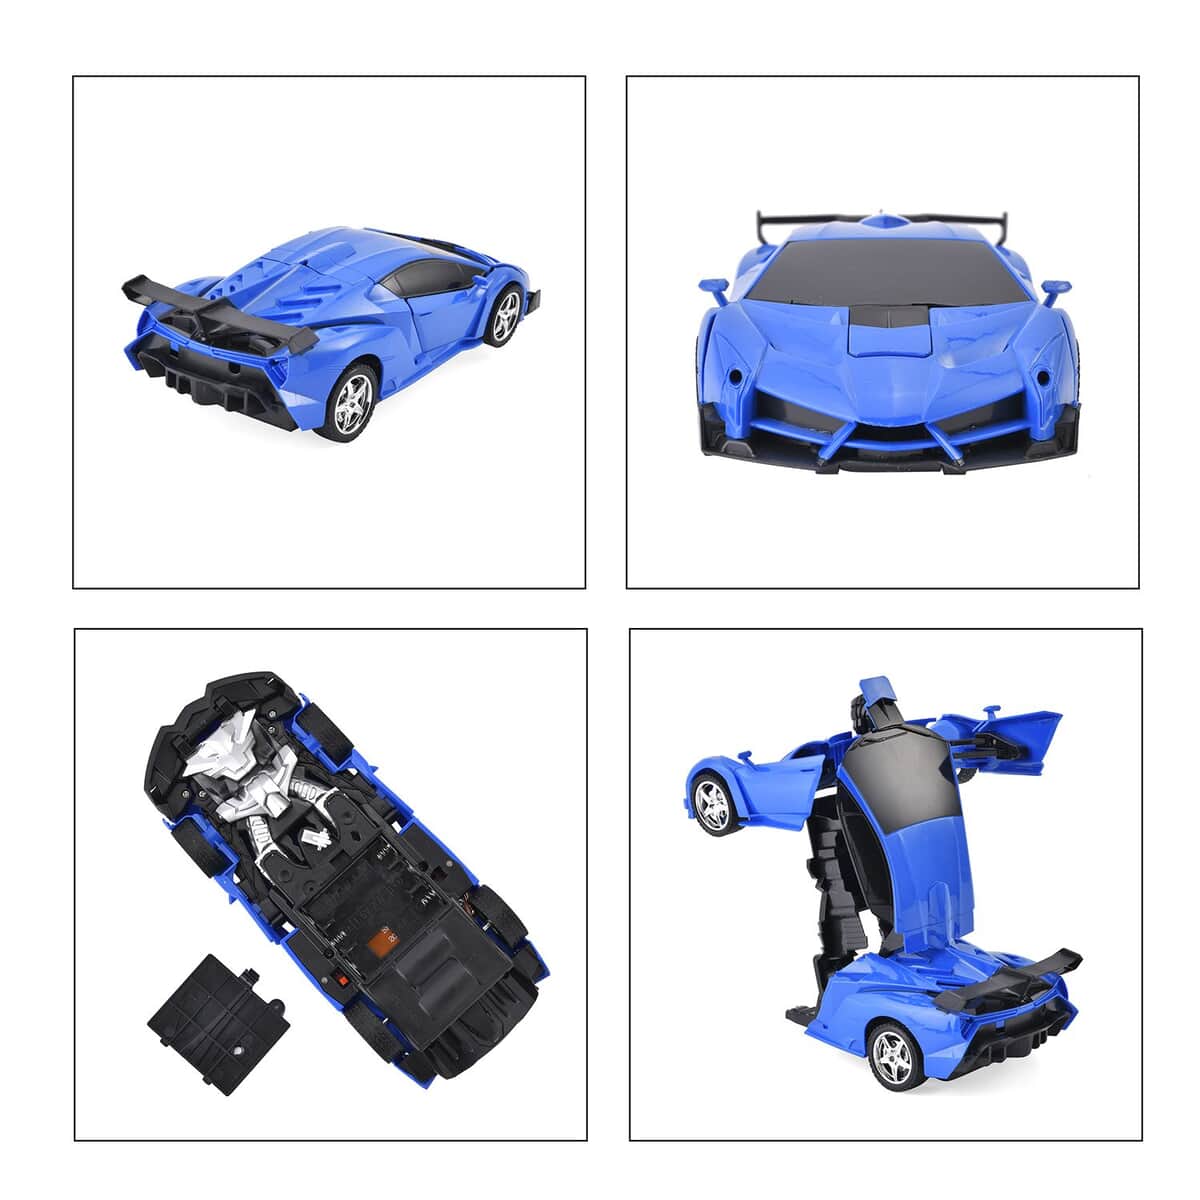 2 in 1 Blue Electric Toy Transform Robot and RC Car 360 Degree Turning Flexibly (Size - Car 23x9x6 cm and Robot: 20x17x15 cm) image number 4